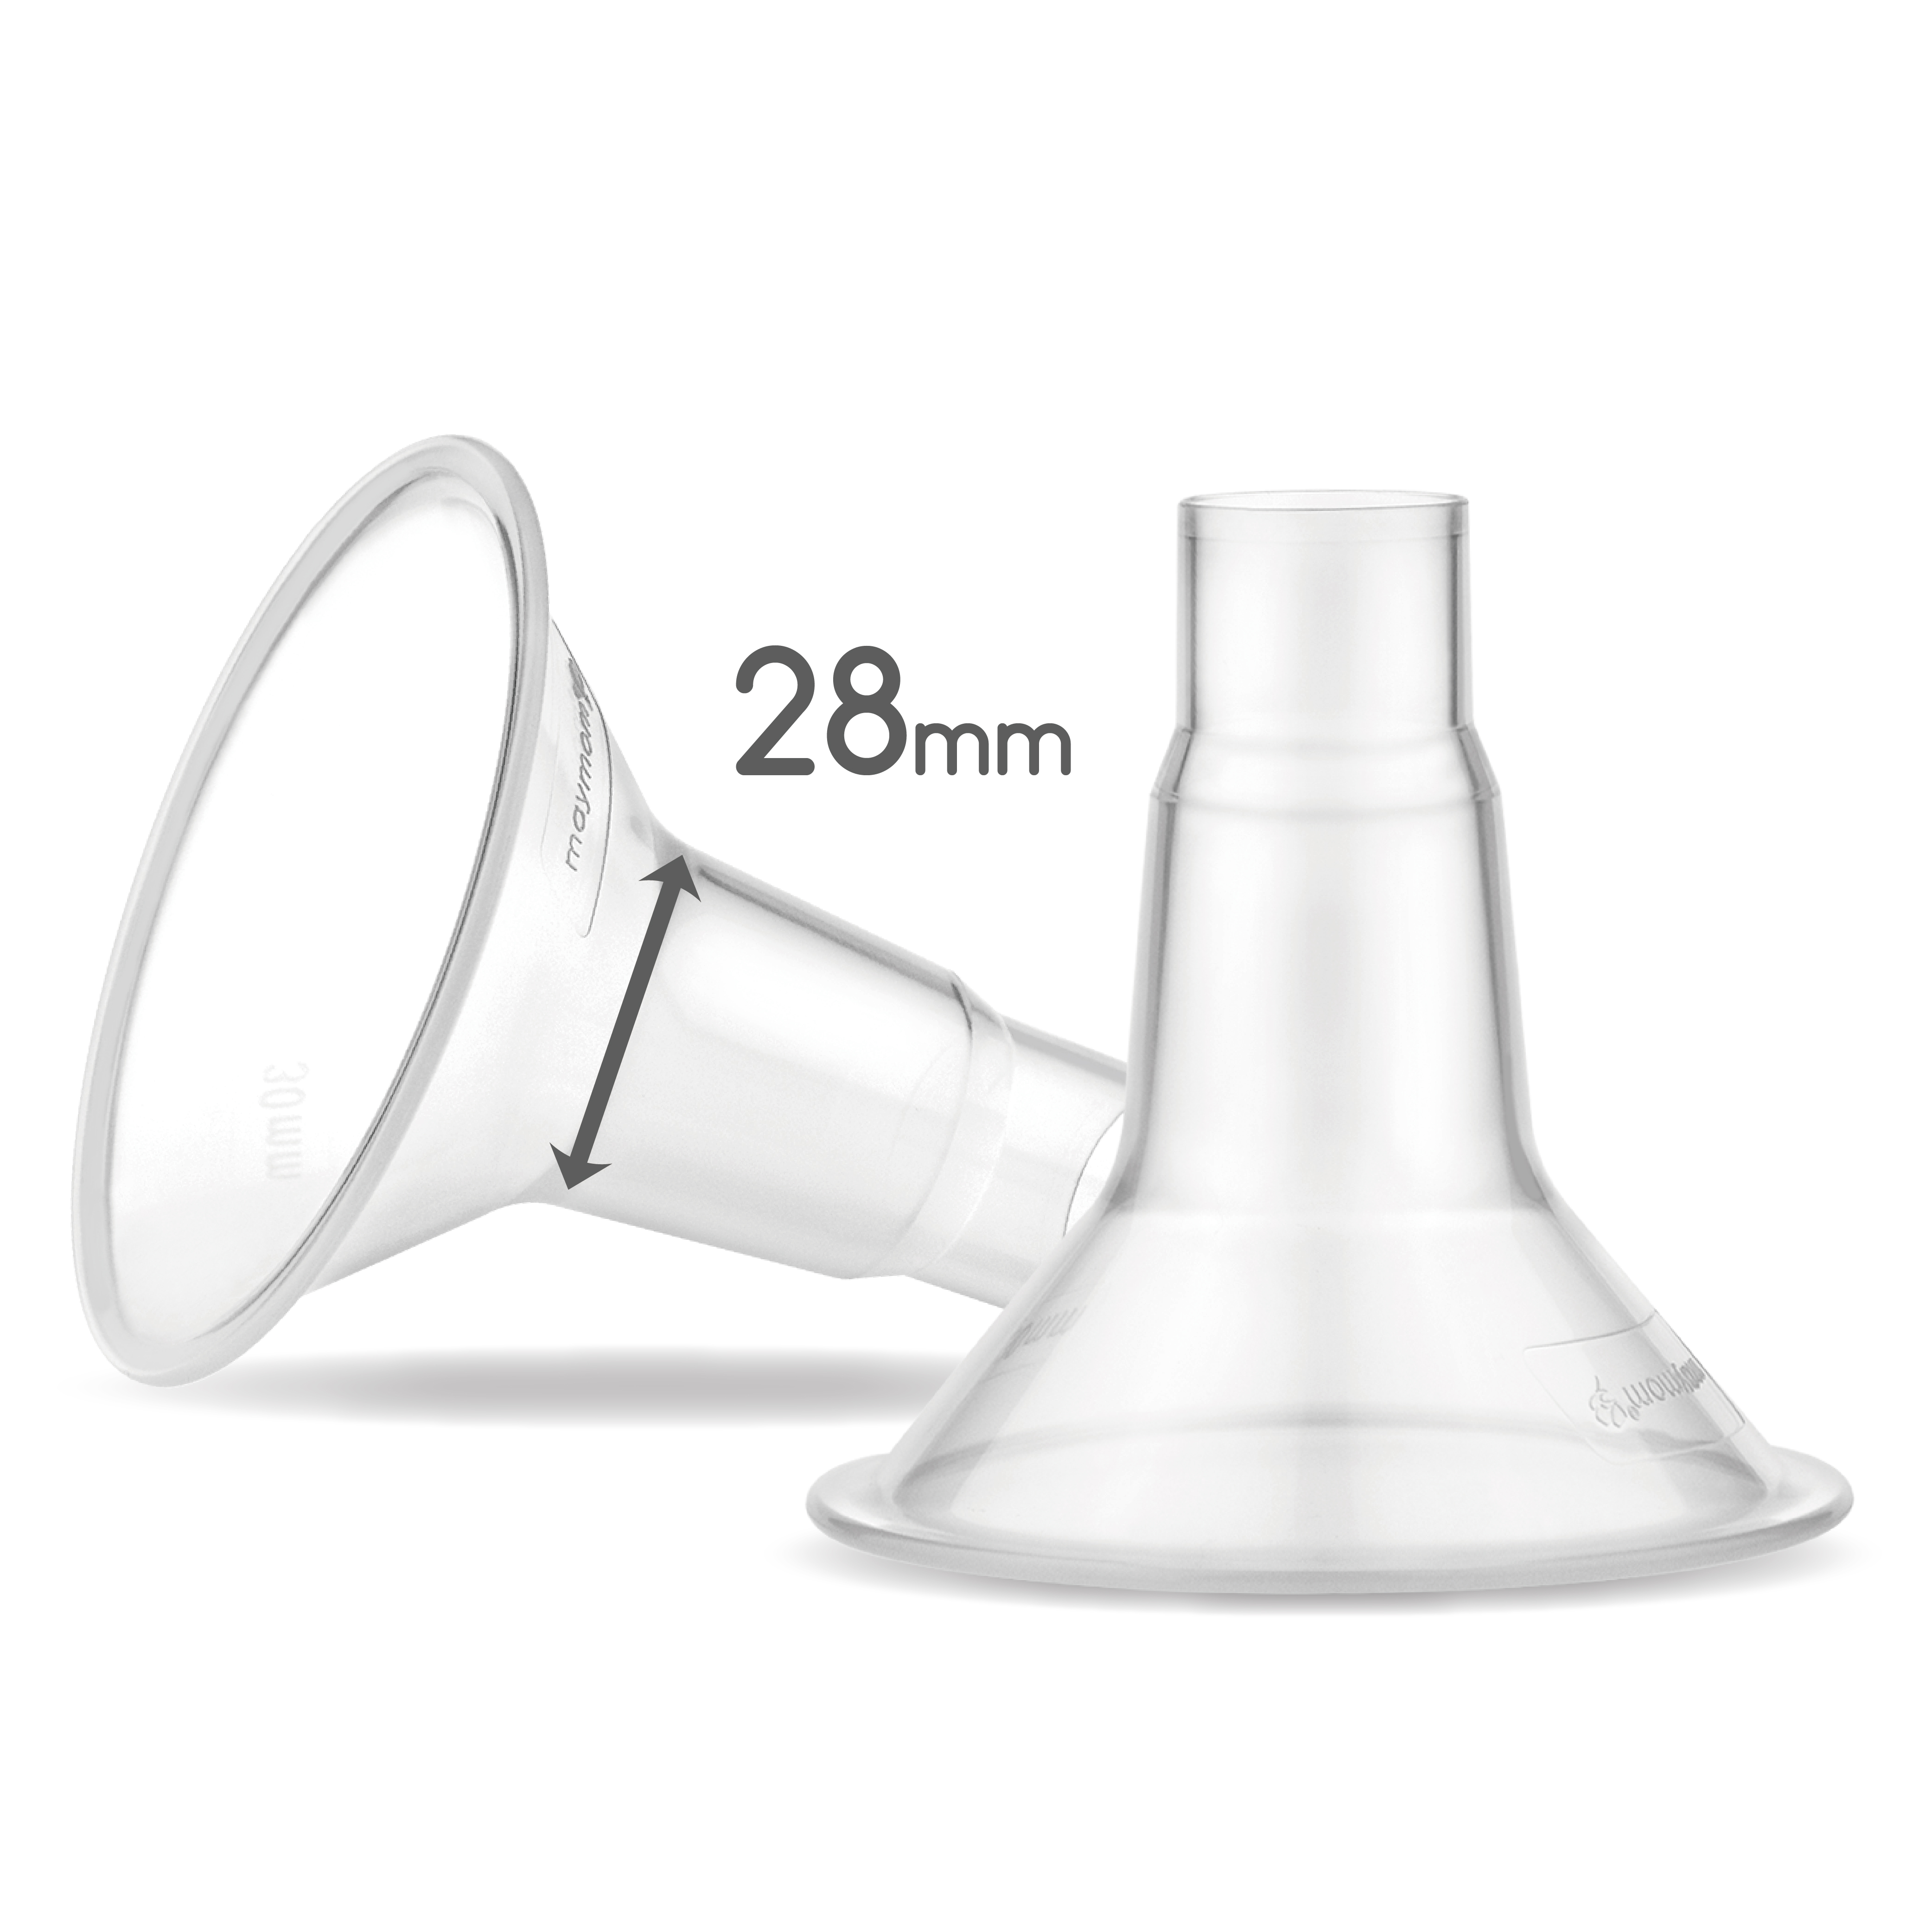 MyFit 28 mm Shield; Compatible with Medela Breast Pumps Having PersonalFit, Freestyle, Harmony, Maxi Connector; Connects; 2pc